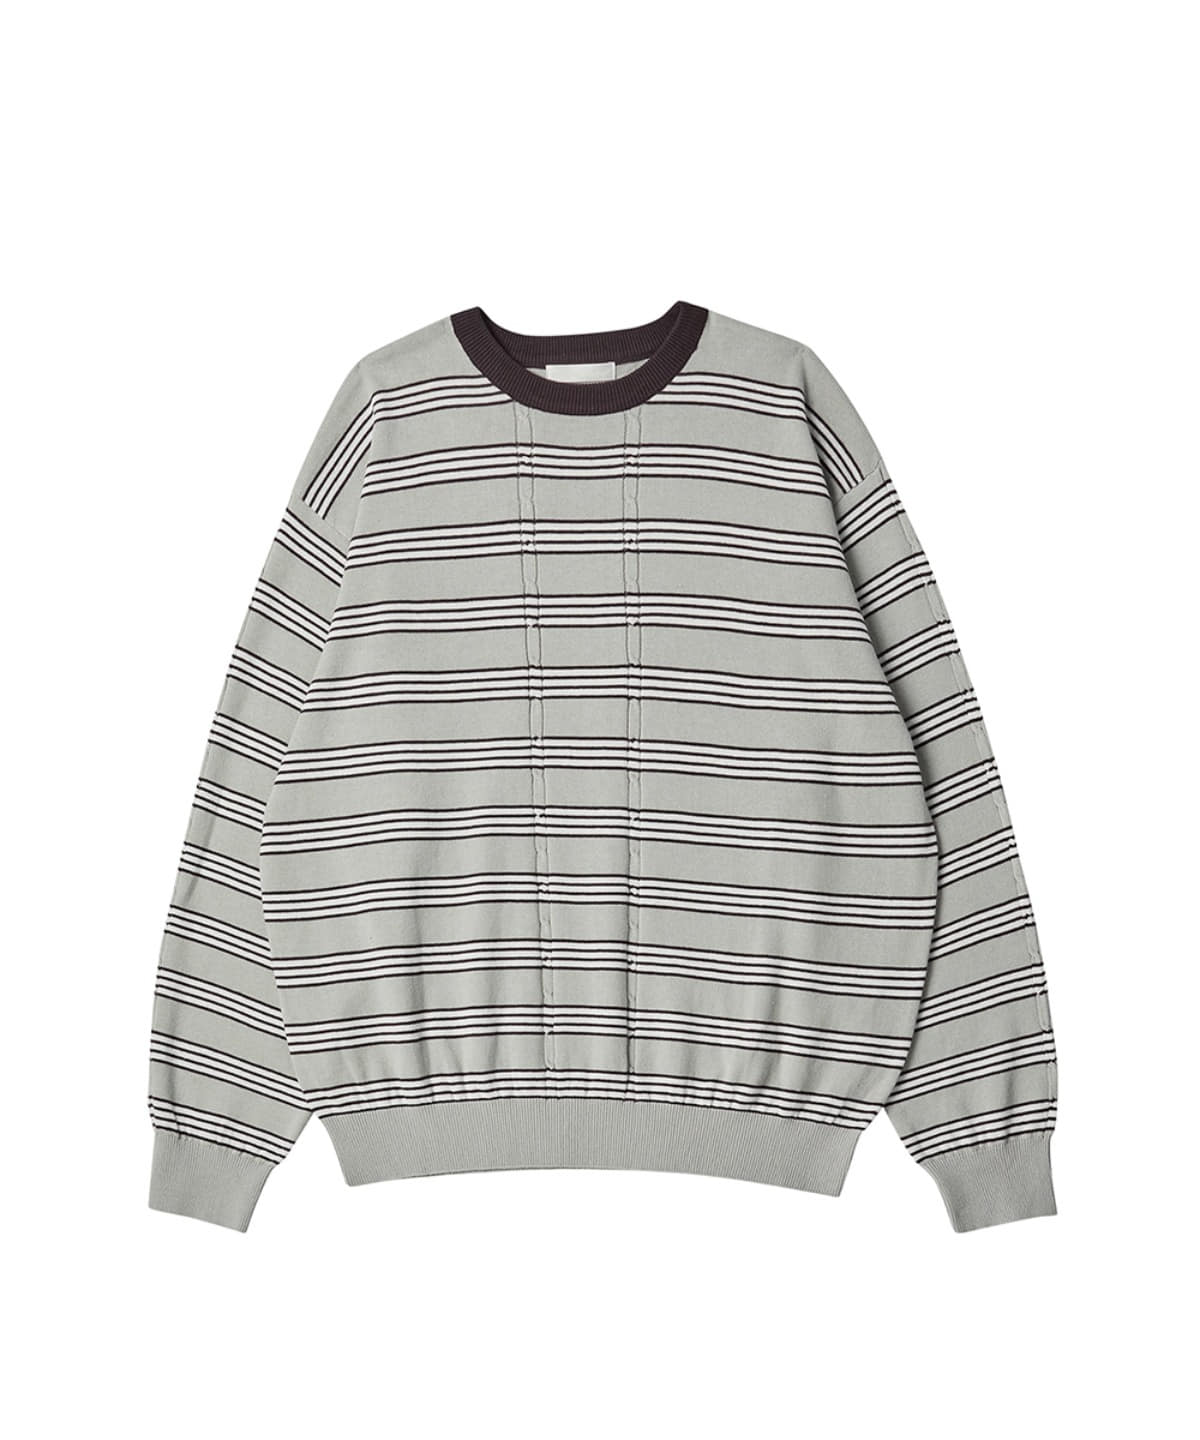 WORTHWHILE MOVEMENT월스와일무브먼트 STRIPE CABLE KNIT (Grey & Brown)